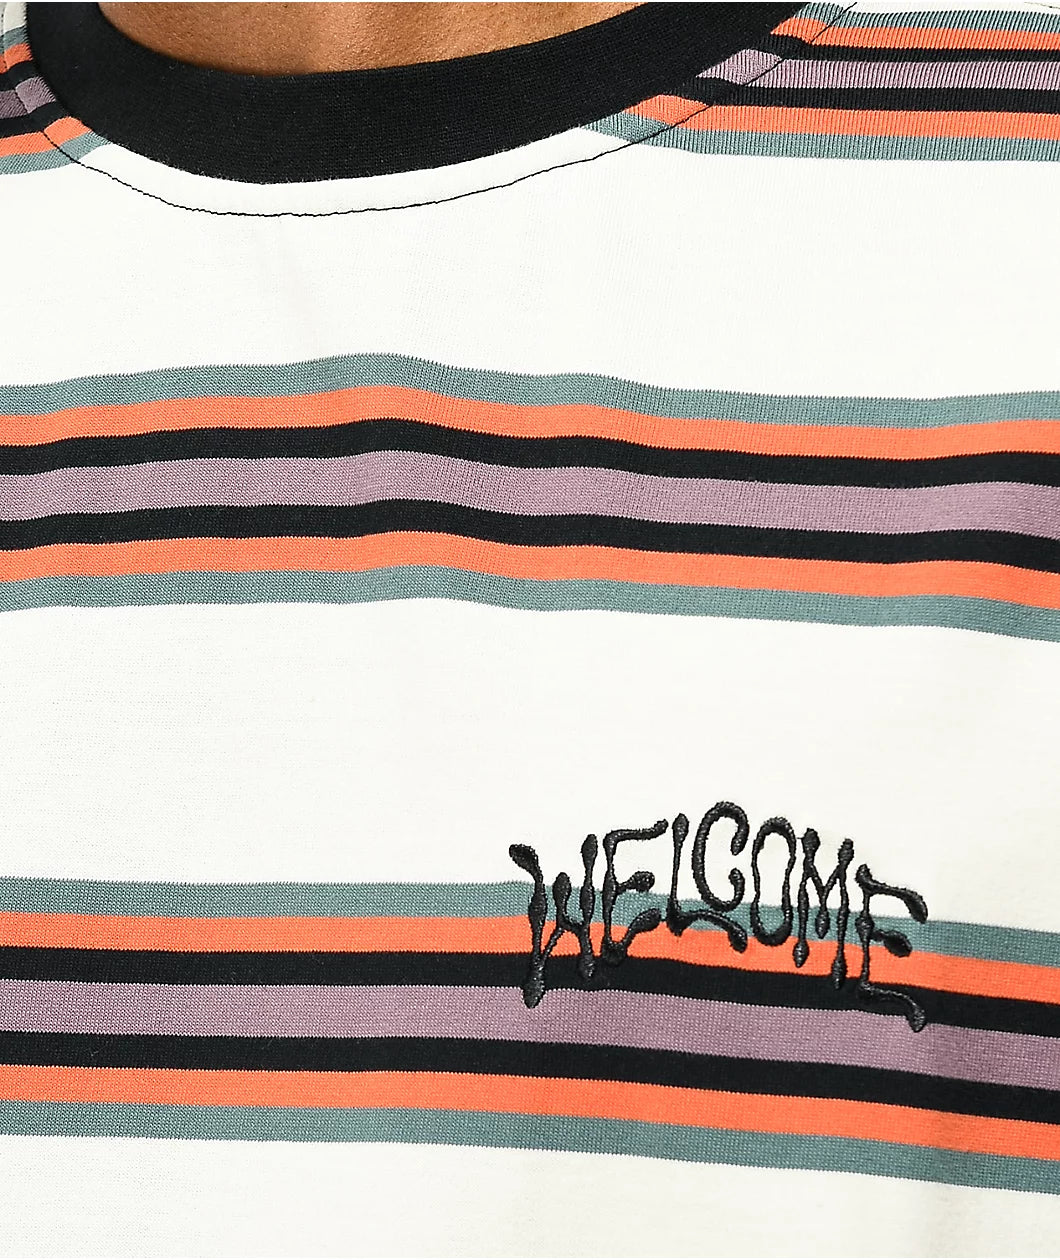 Welcome - Thelema Stripe T-Shirt